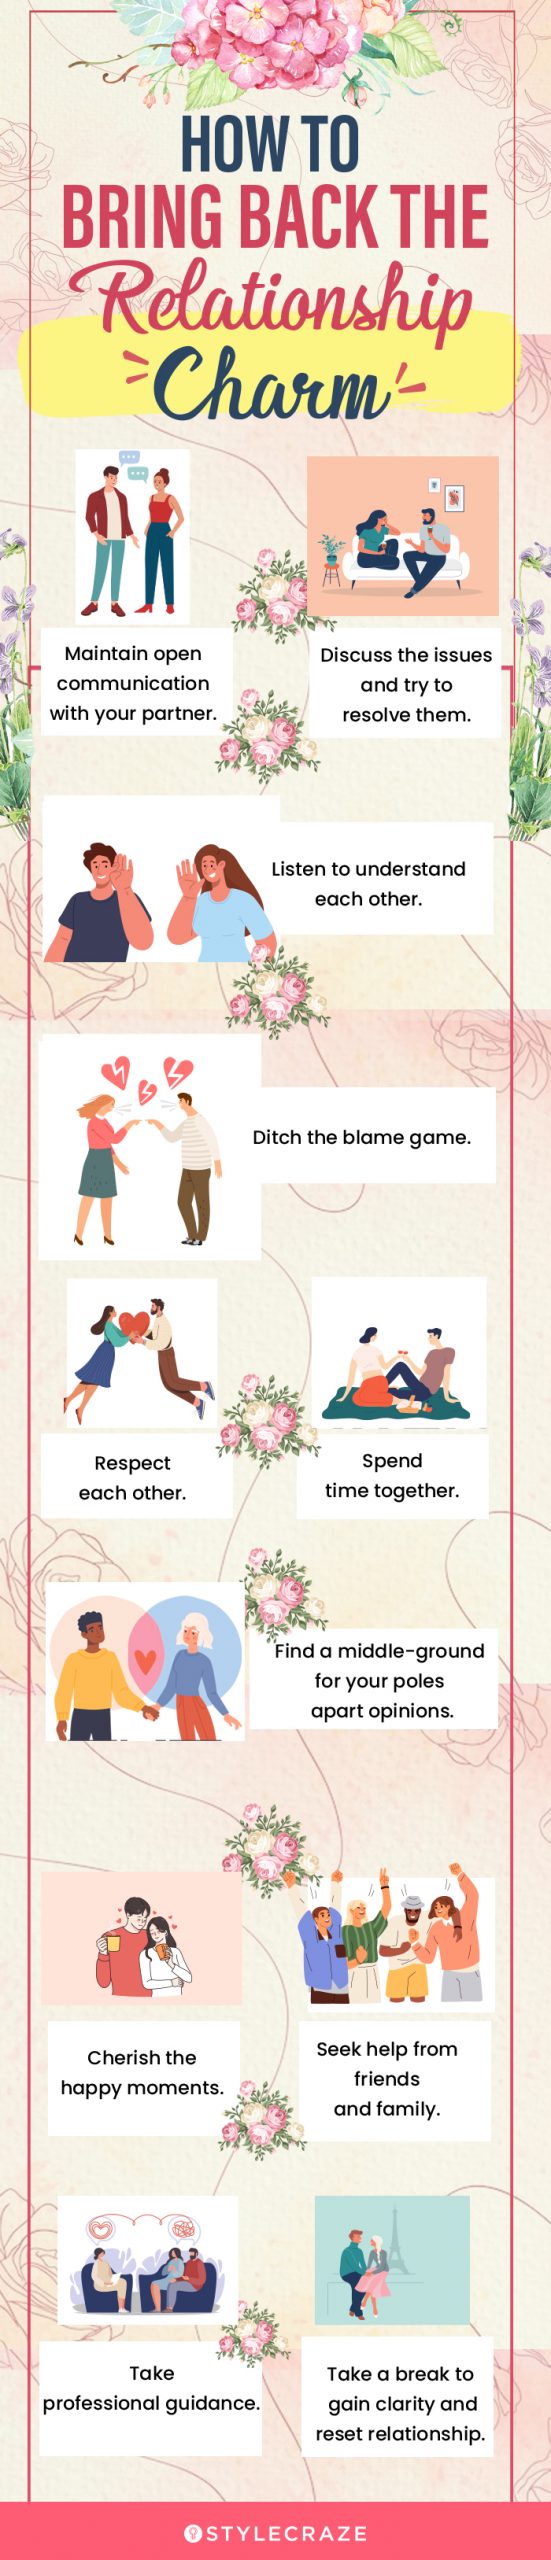 how to bring back the relationship charm (infographic)